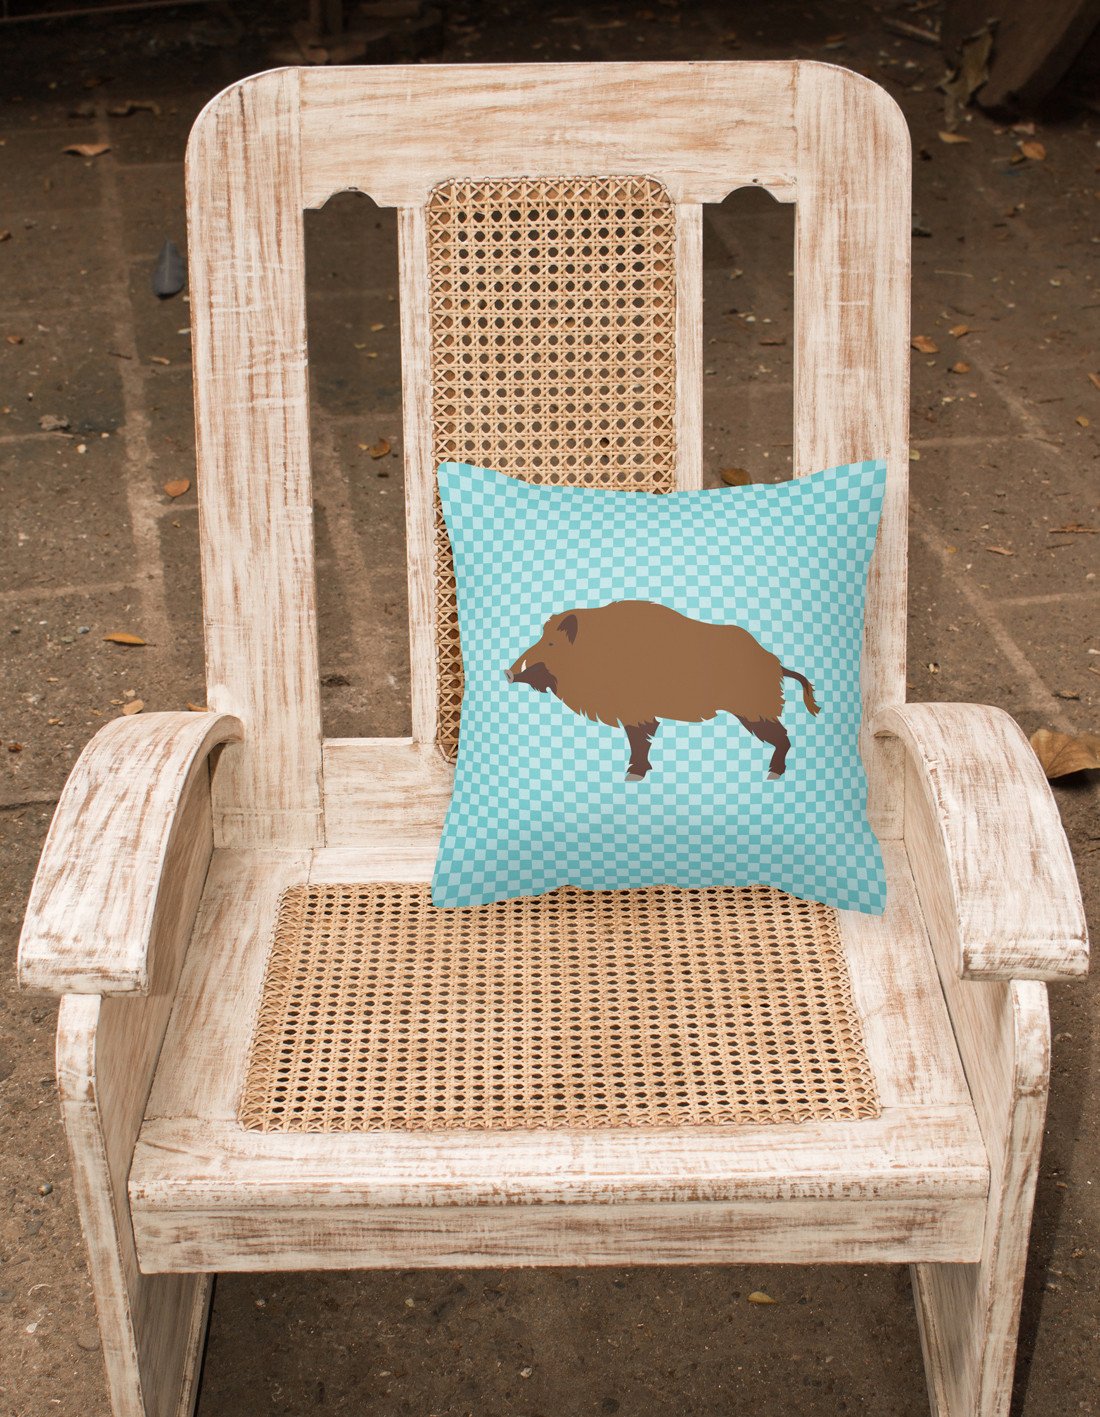 Wild Boar Pig Blue Check Fabric Decorative Pillow BB8110PW1818 by Caroline's Treasures